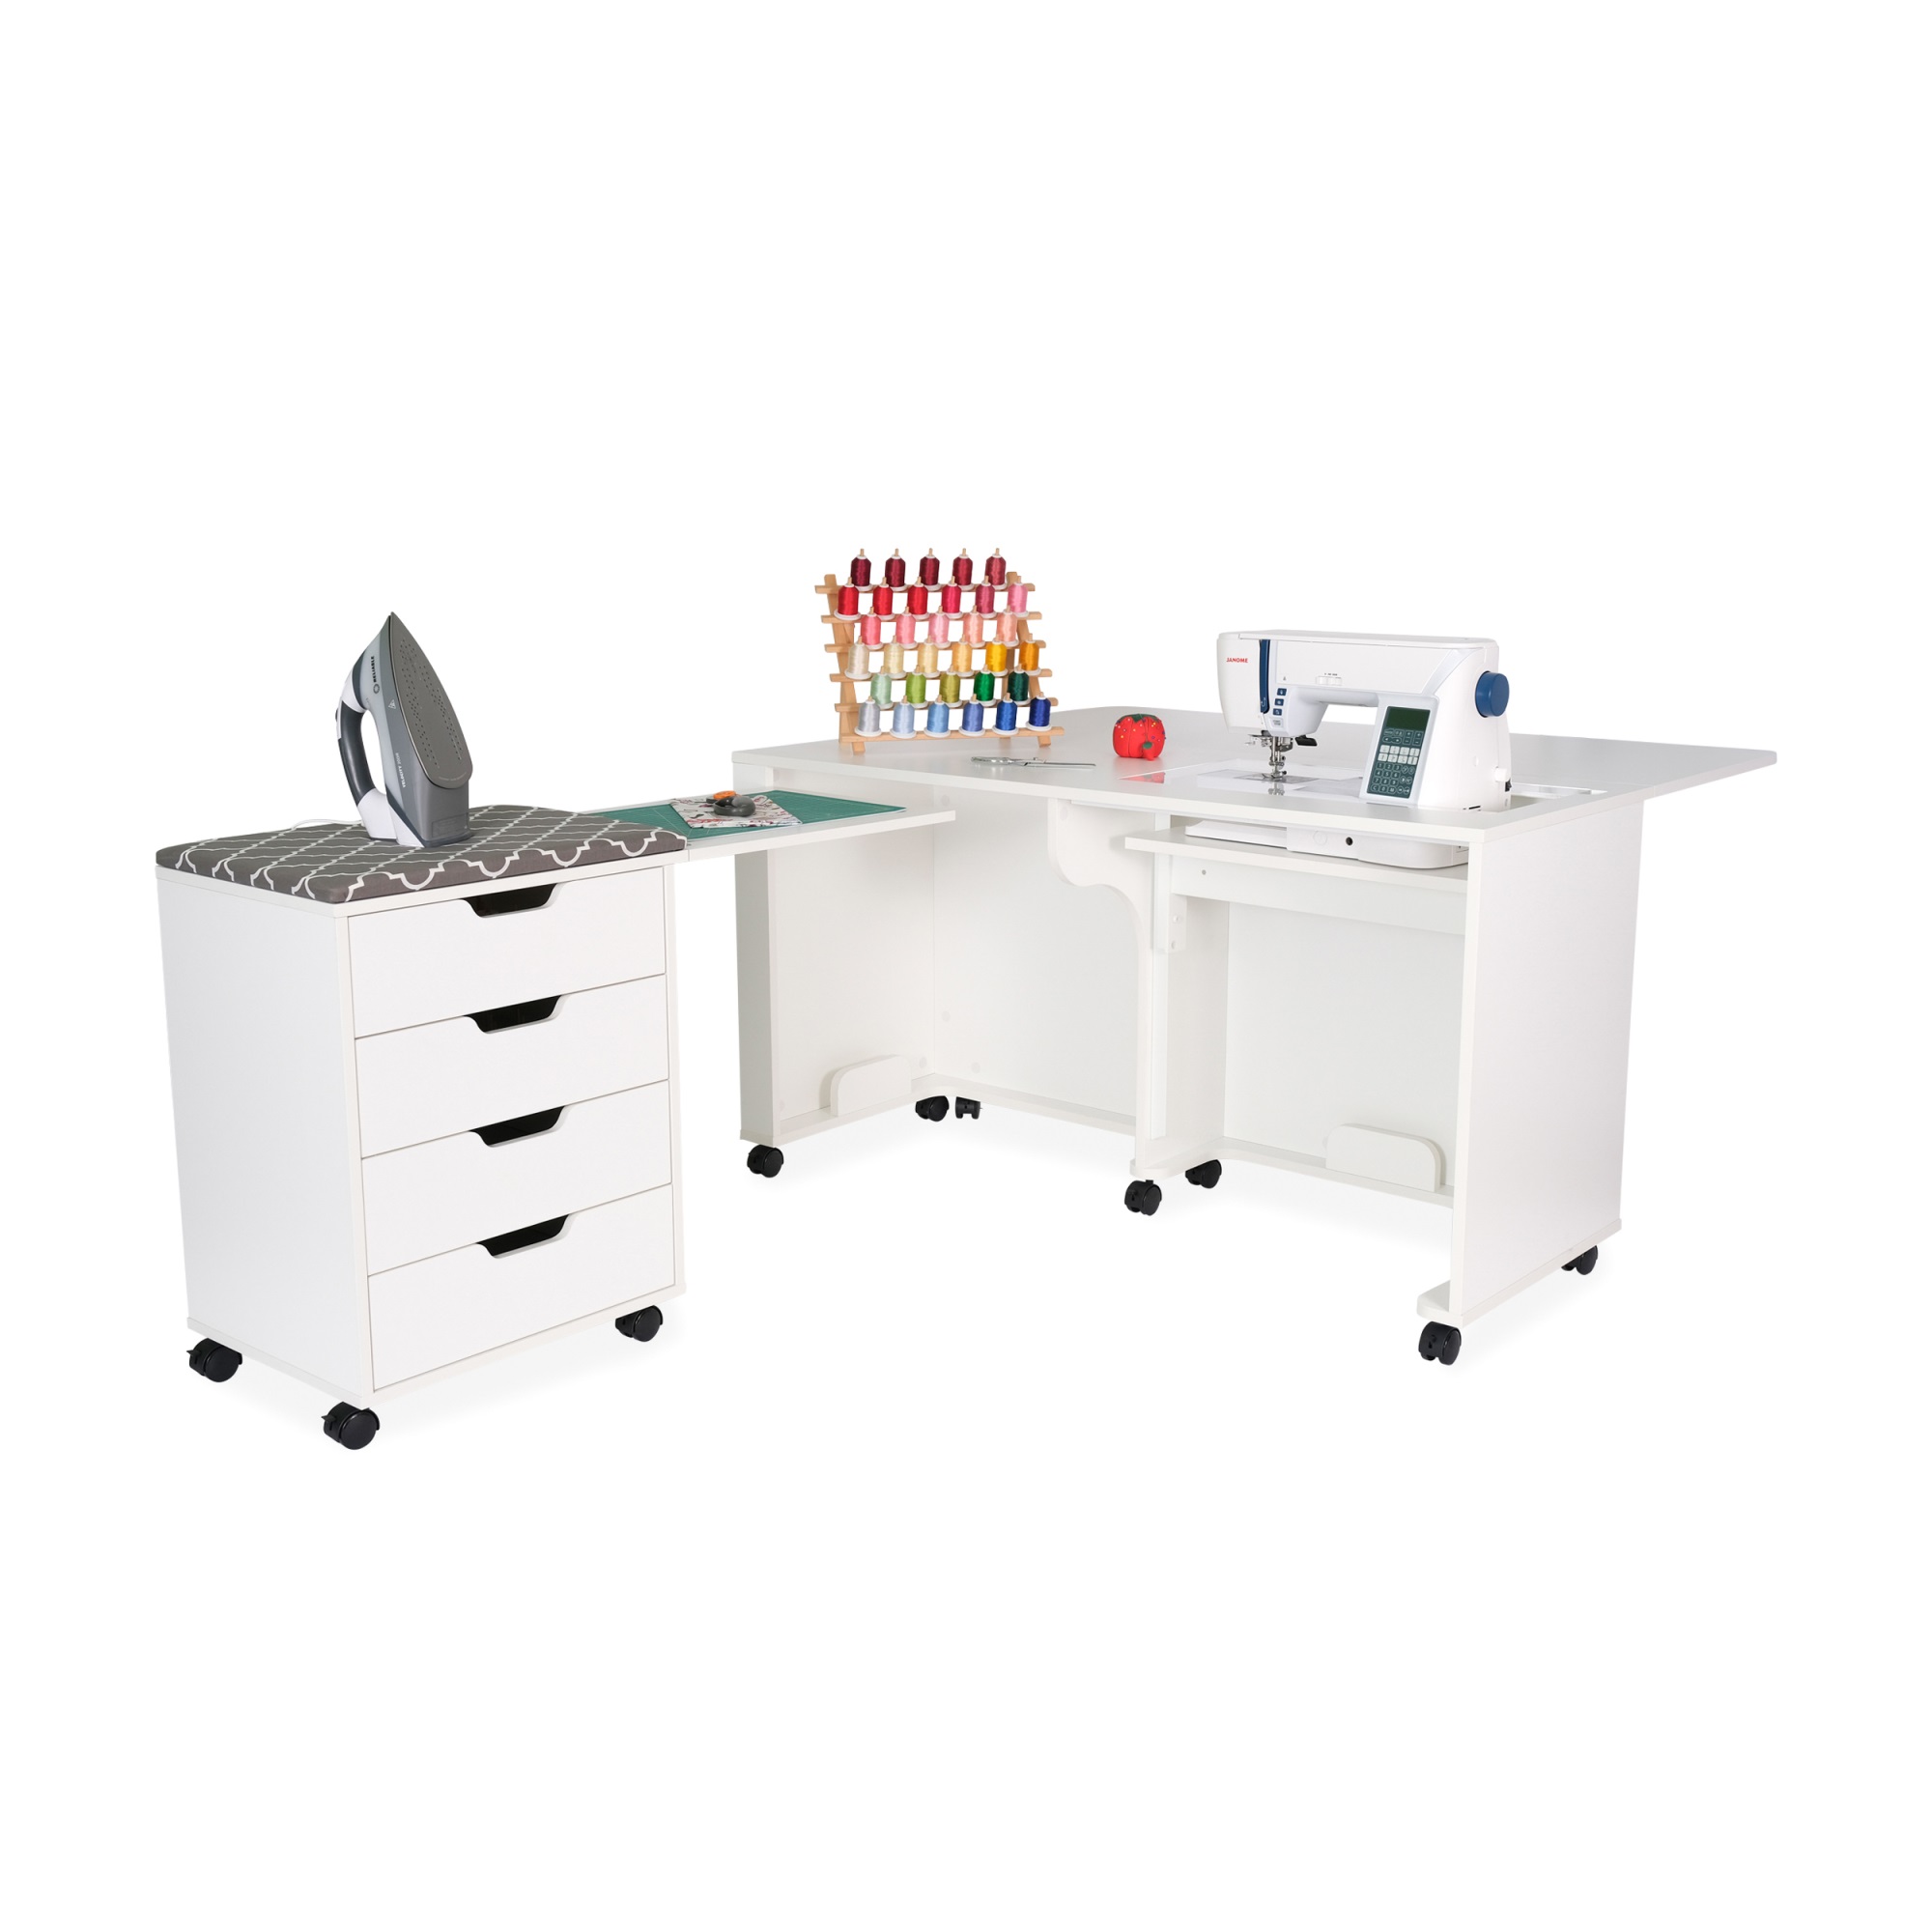 Arrow Laverne & Shirley Sewing Cabinet White